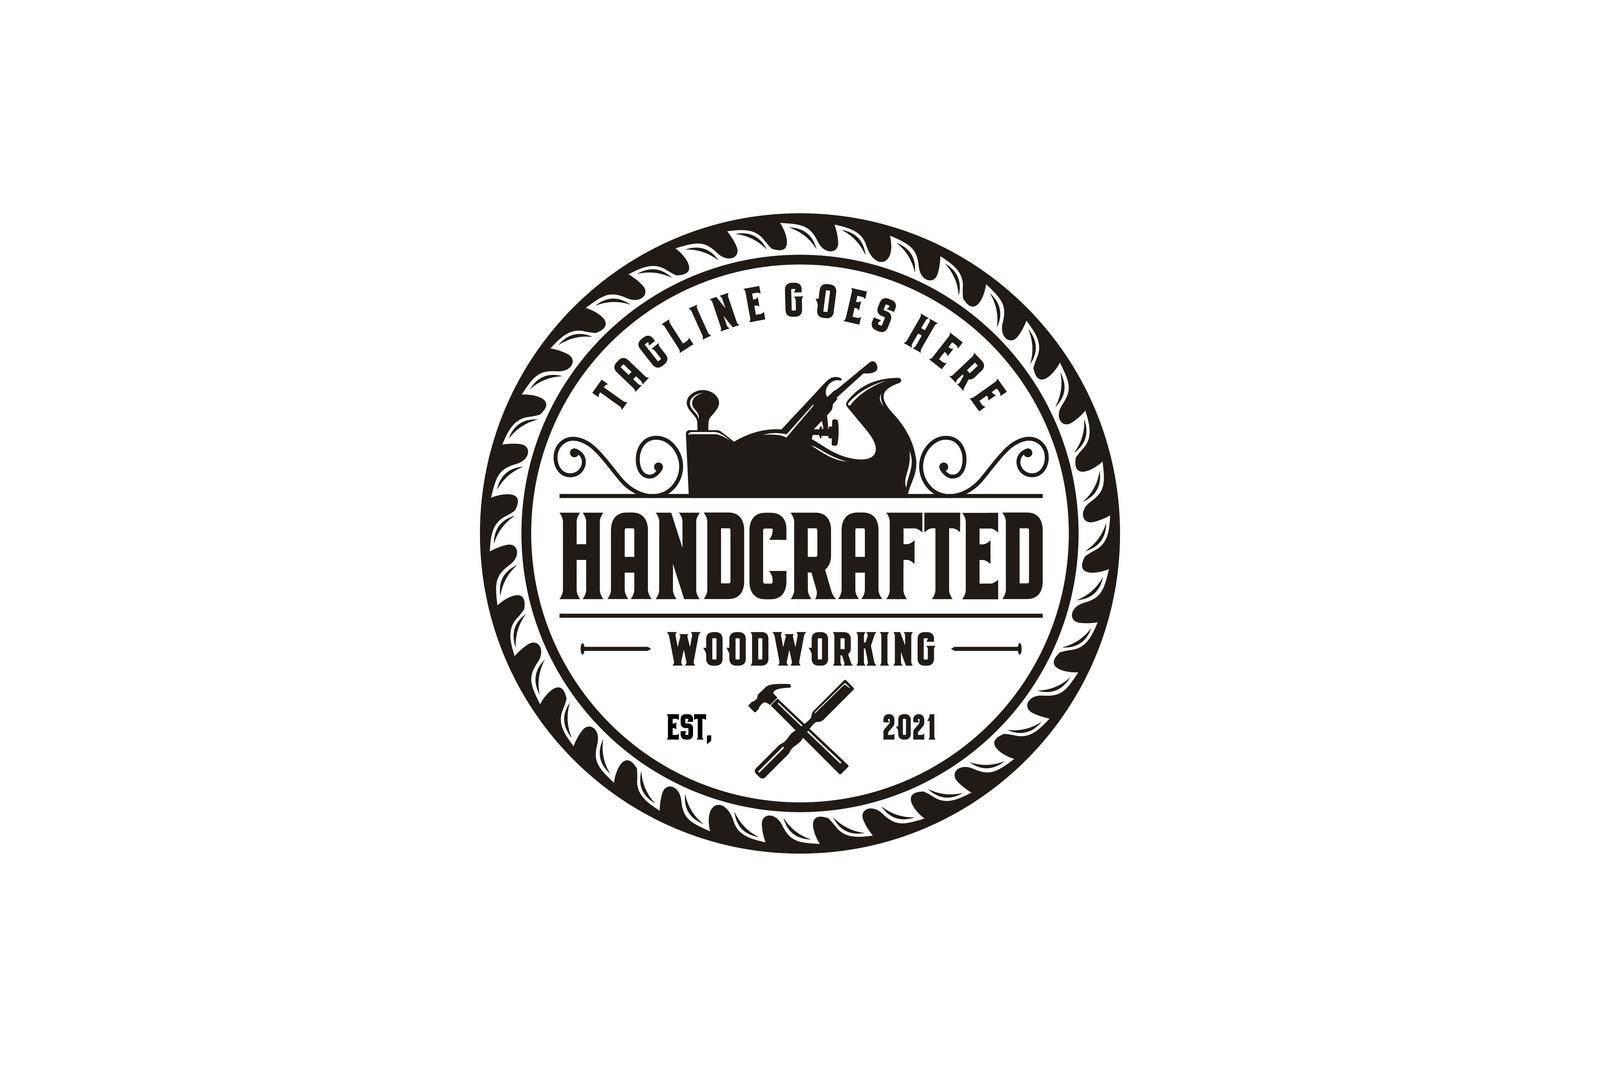 Retro Vintage Woodworking Logo design with Fore Plane / Jack Plane Vector